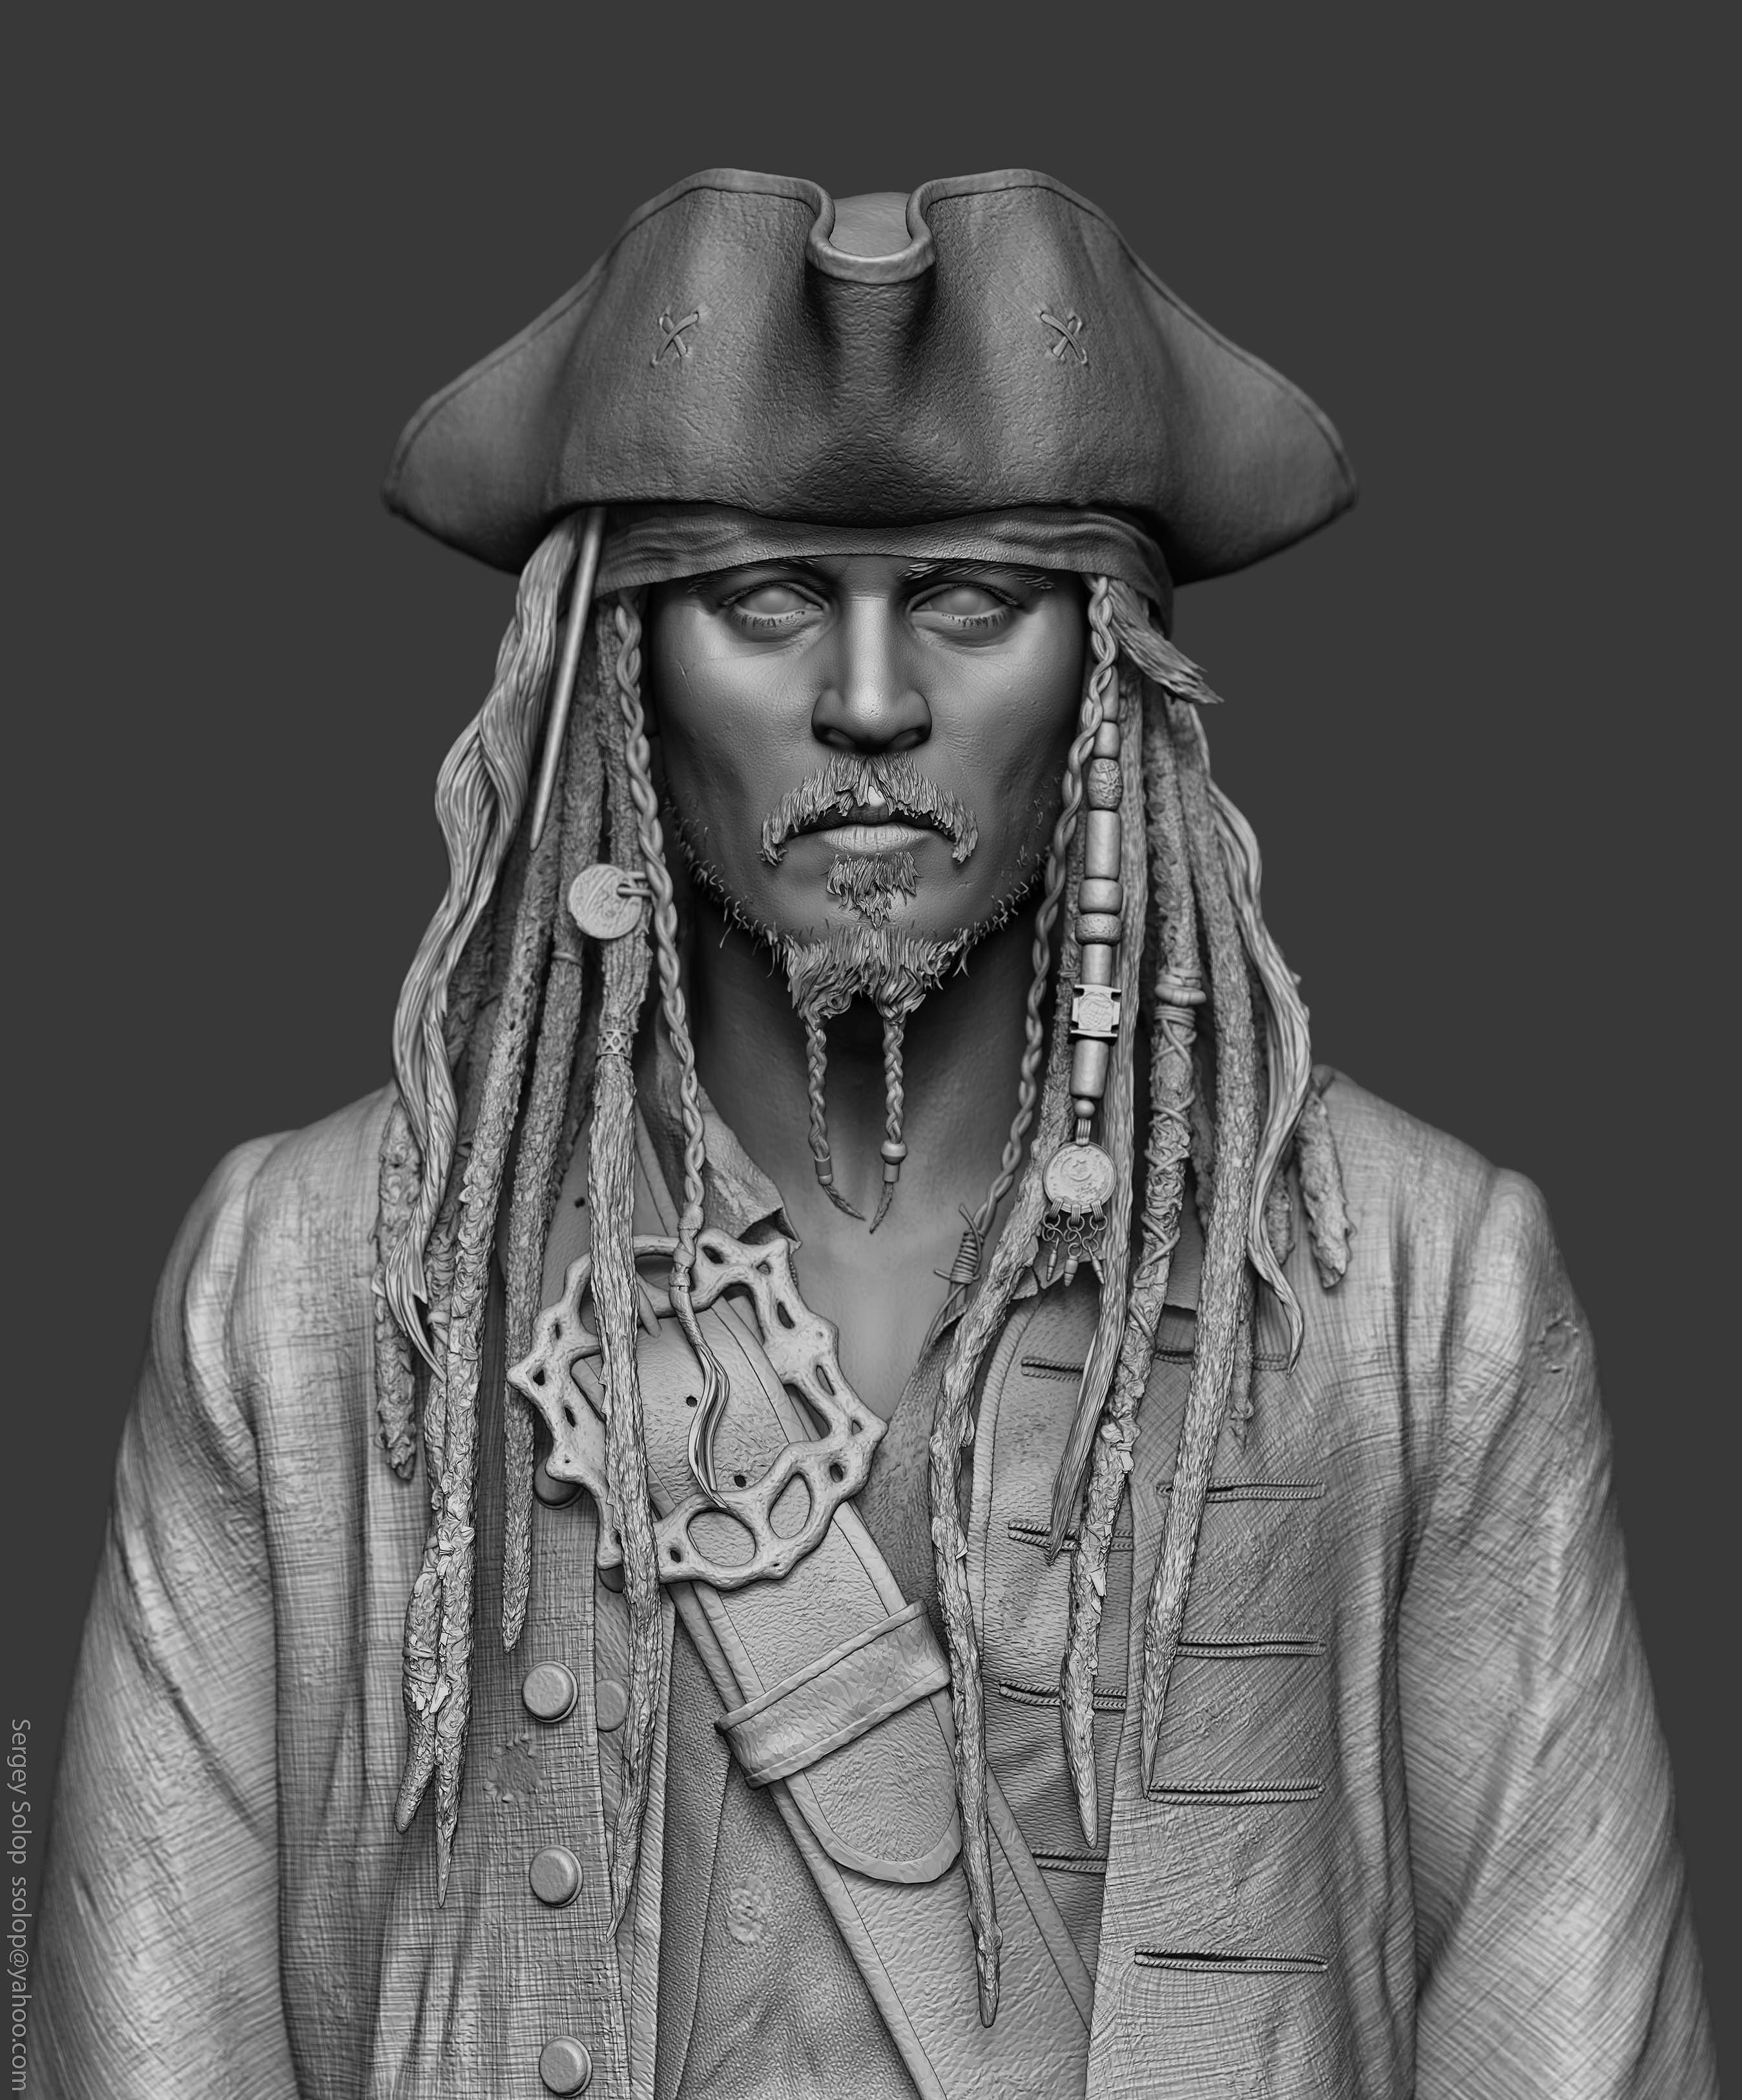 sergey-solop-jack-sparrow-pirates-of-the-caribbean-wip-12.jpg